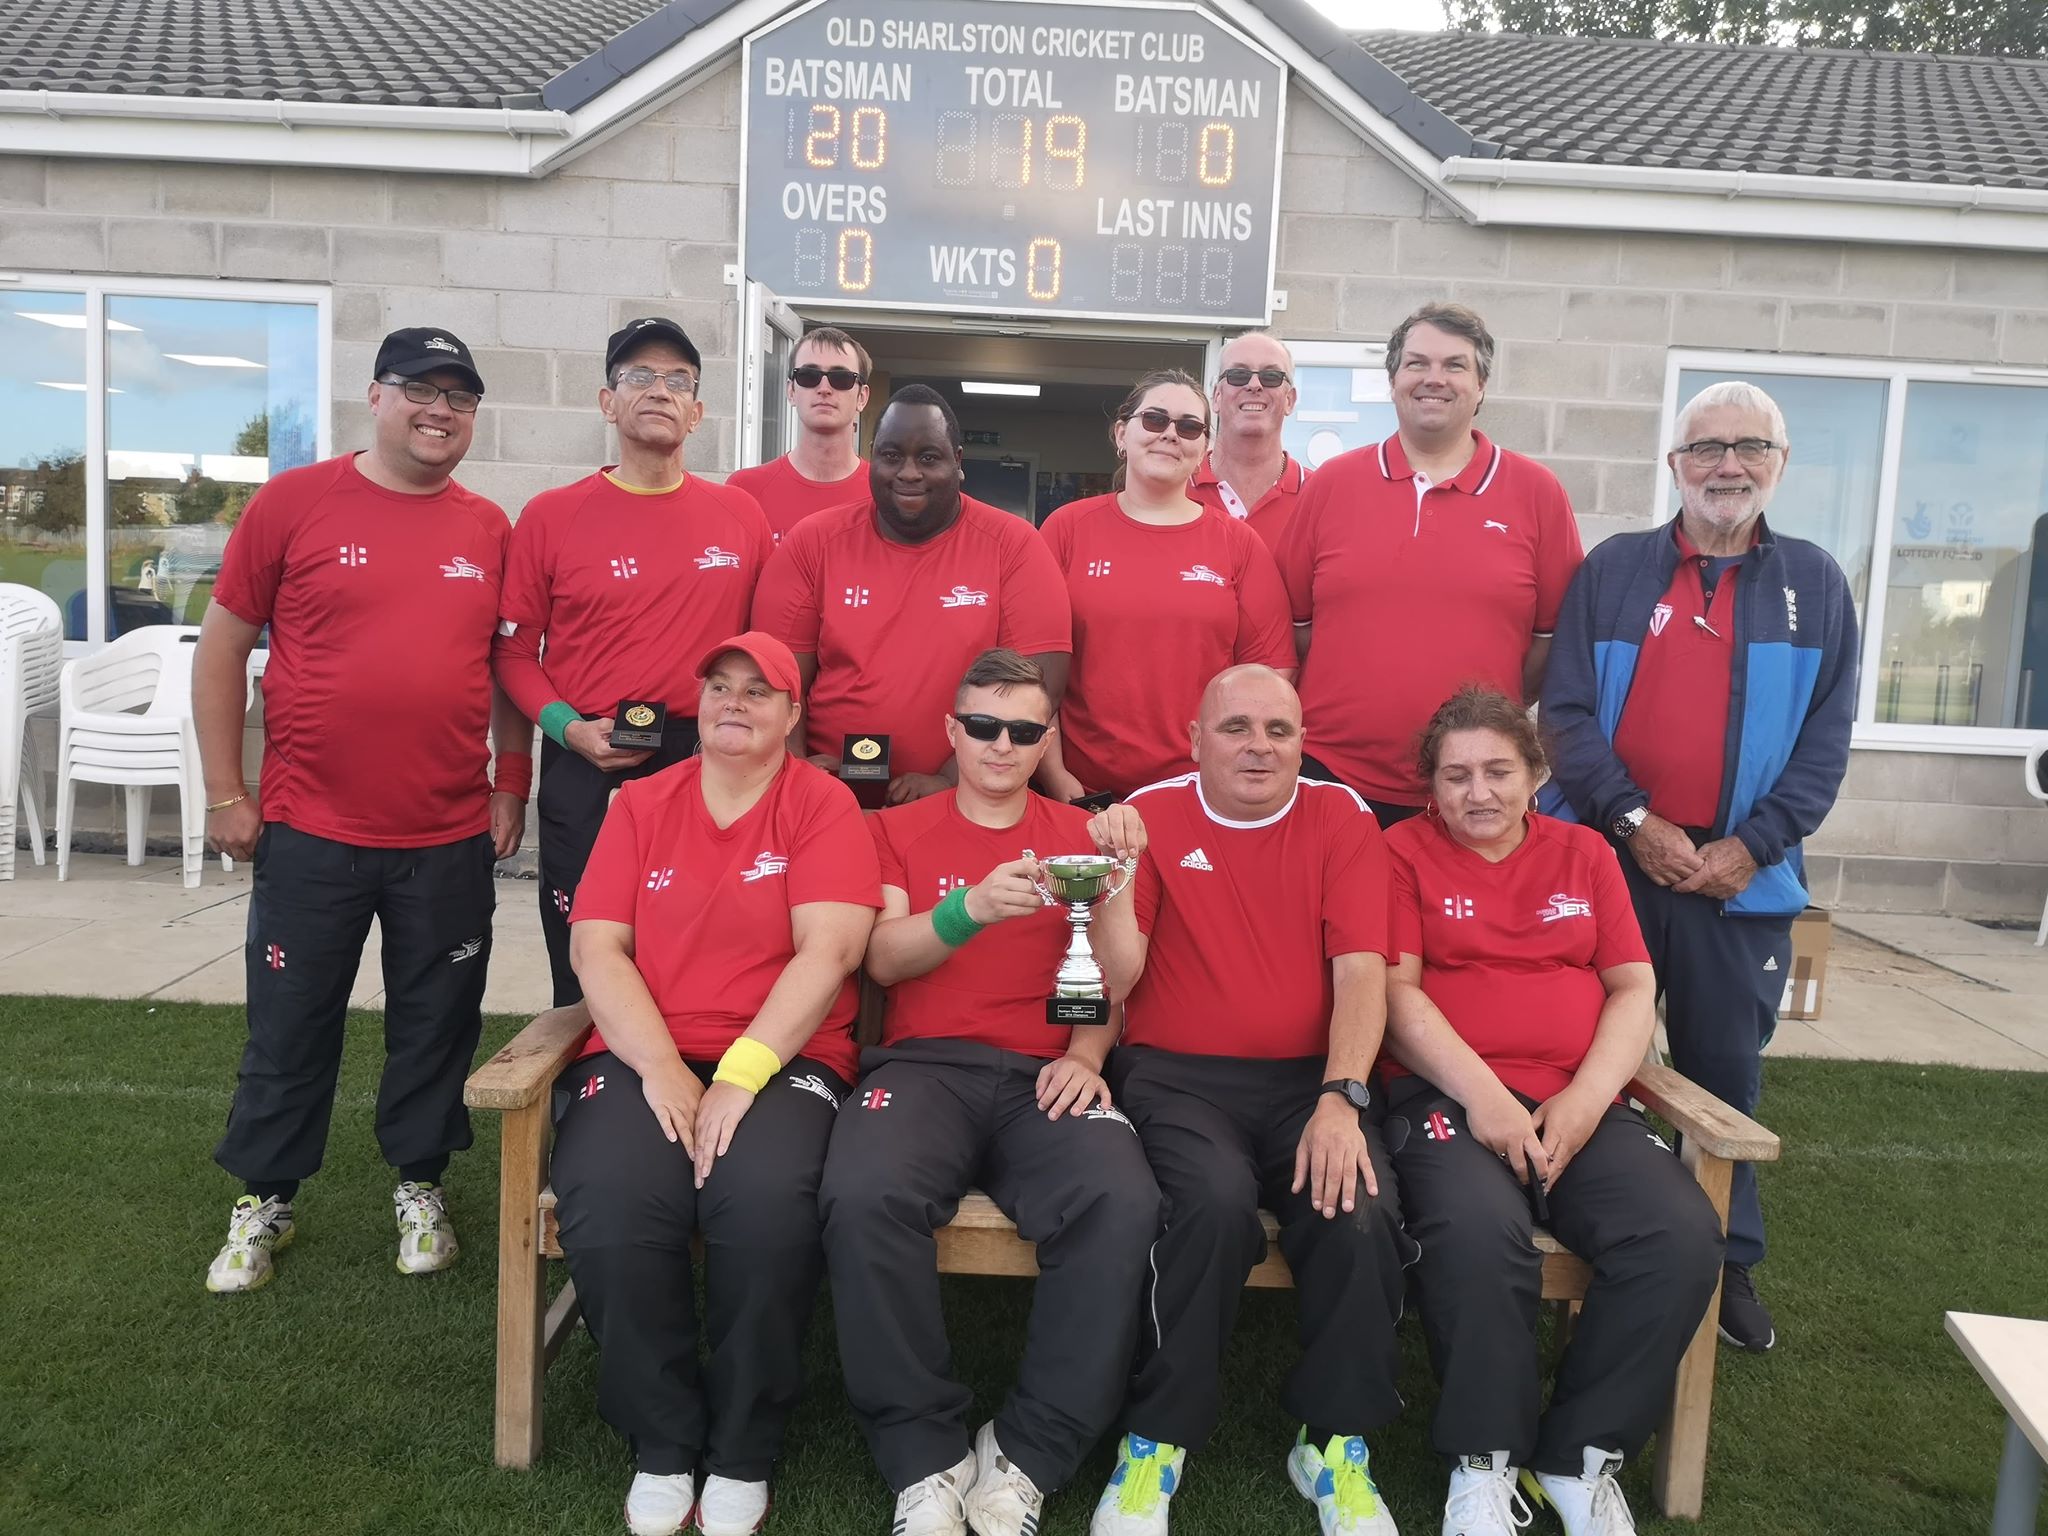 The Durham Visually Impaired Cricket Team together for a photo after winning the Northern Regional League title at the end of the season in 2019.